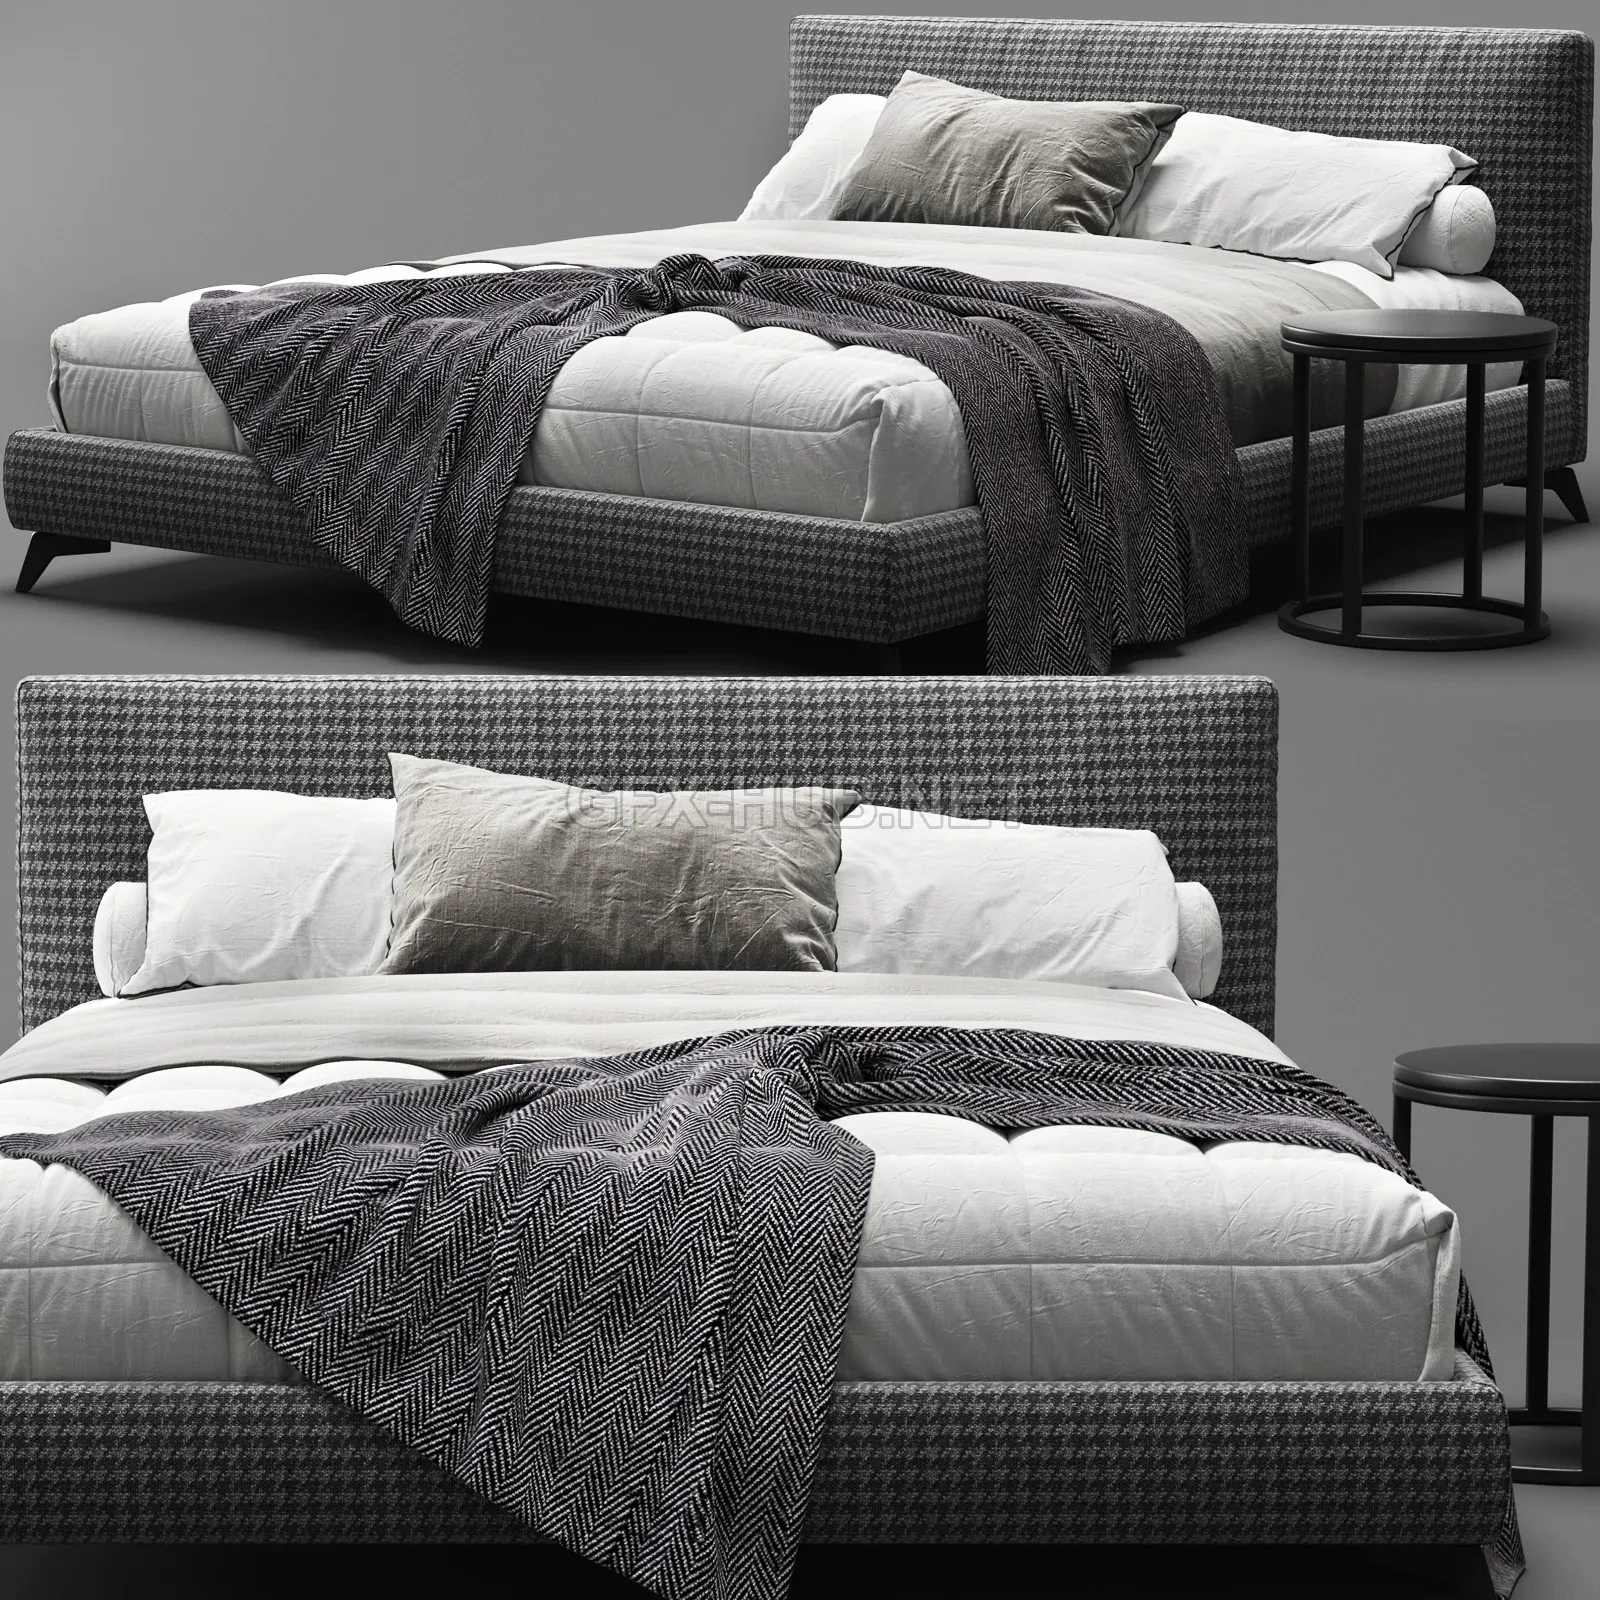 Meridiani Stone Up Bed B (Max 2012 Vray) – 219955